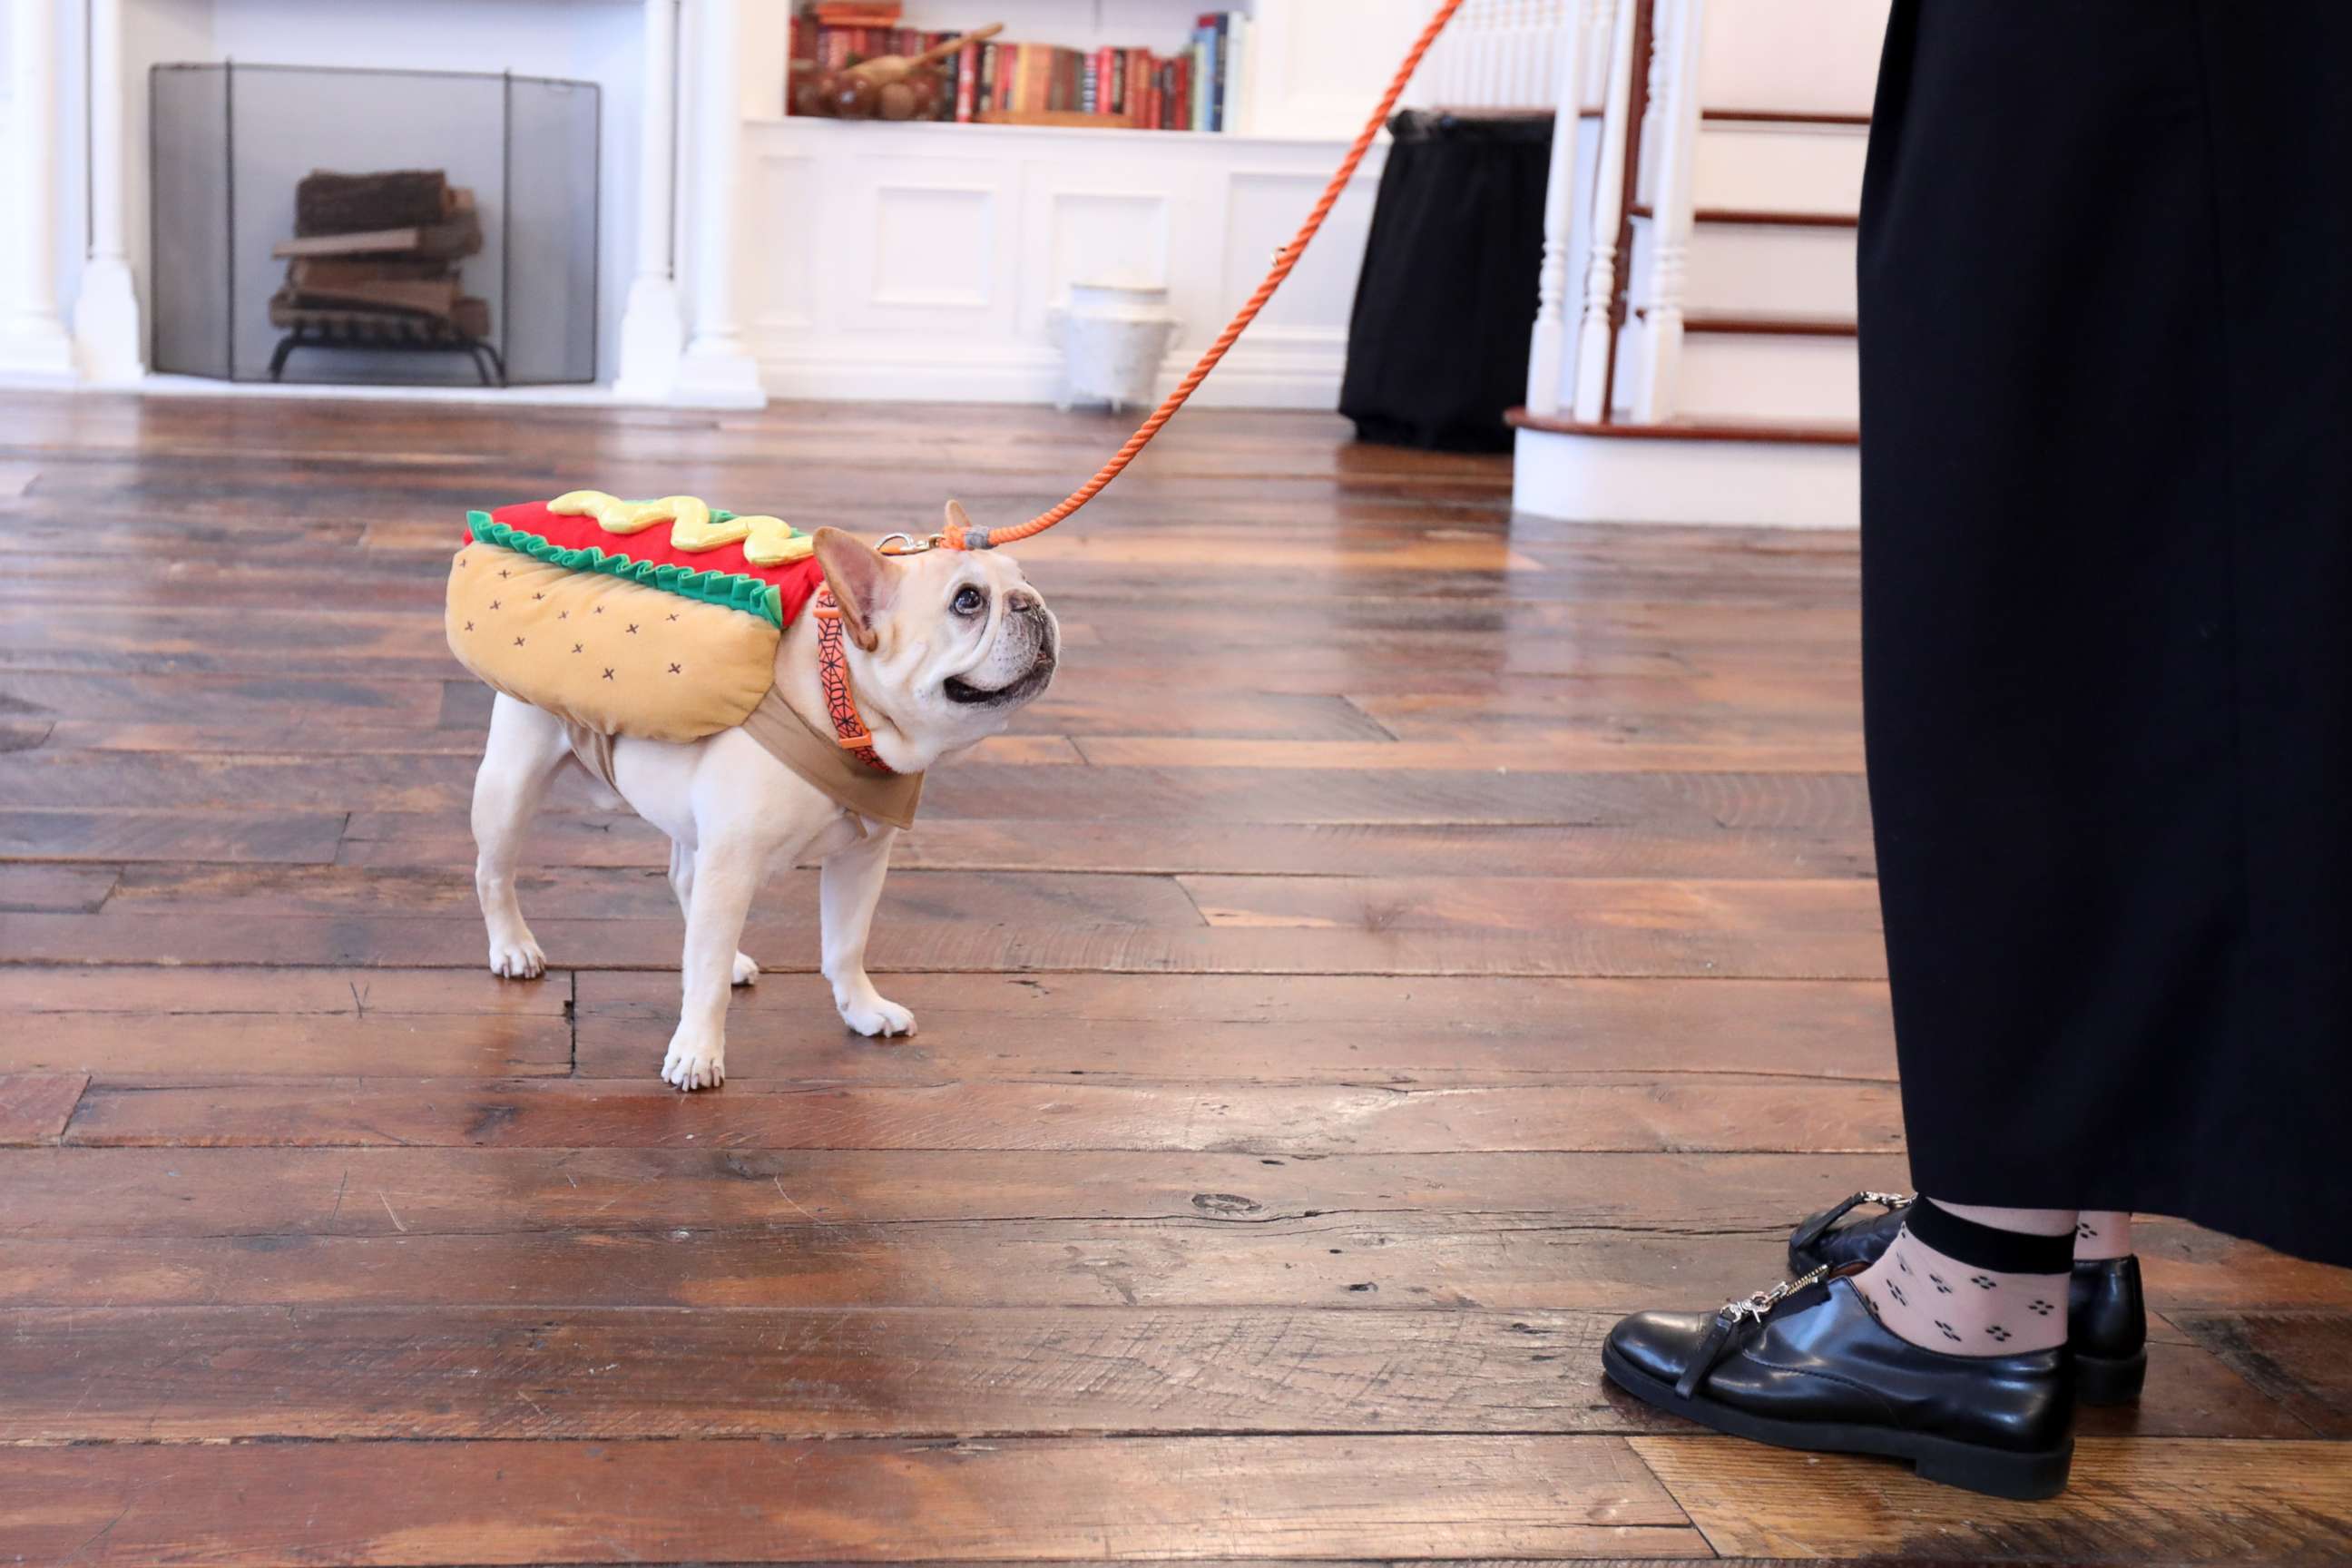 PHOTO: A French Bulldog dresses up as a hotdog at this year's PetSmart Halloween event.